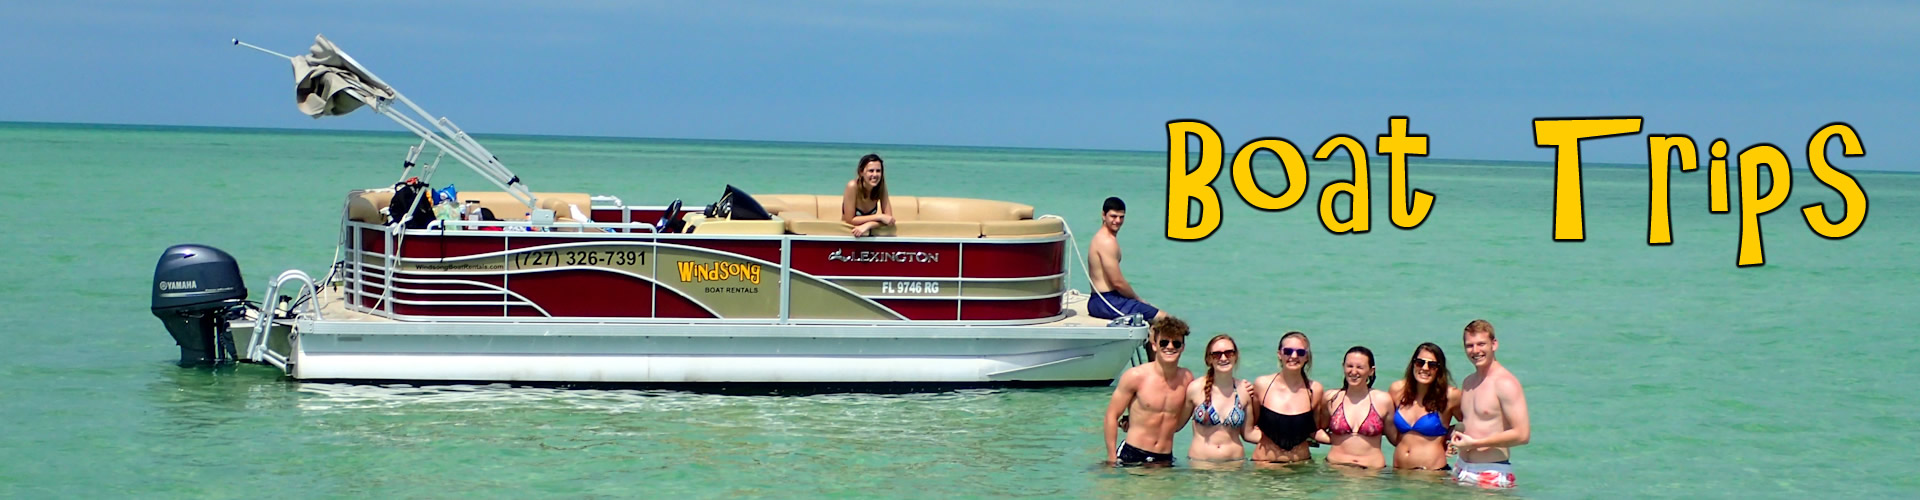 Tampa Bay's #1 Party Boat Tours and Cruises - Tampa Bay Fun Boat